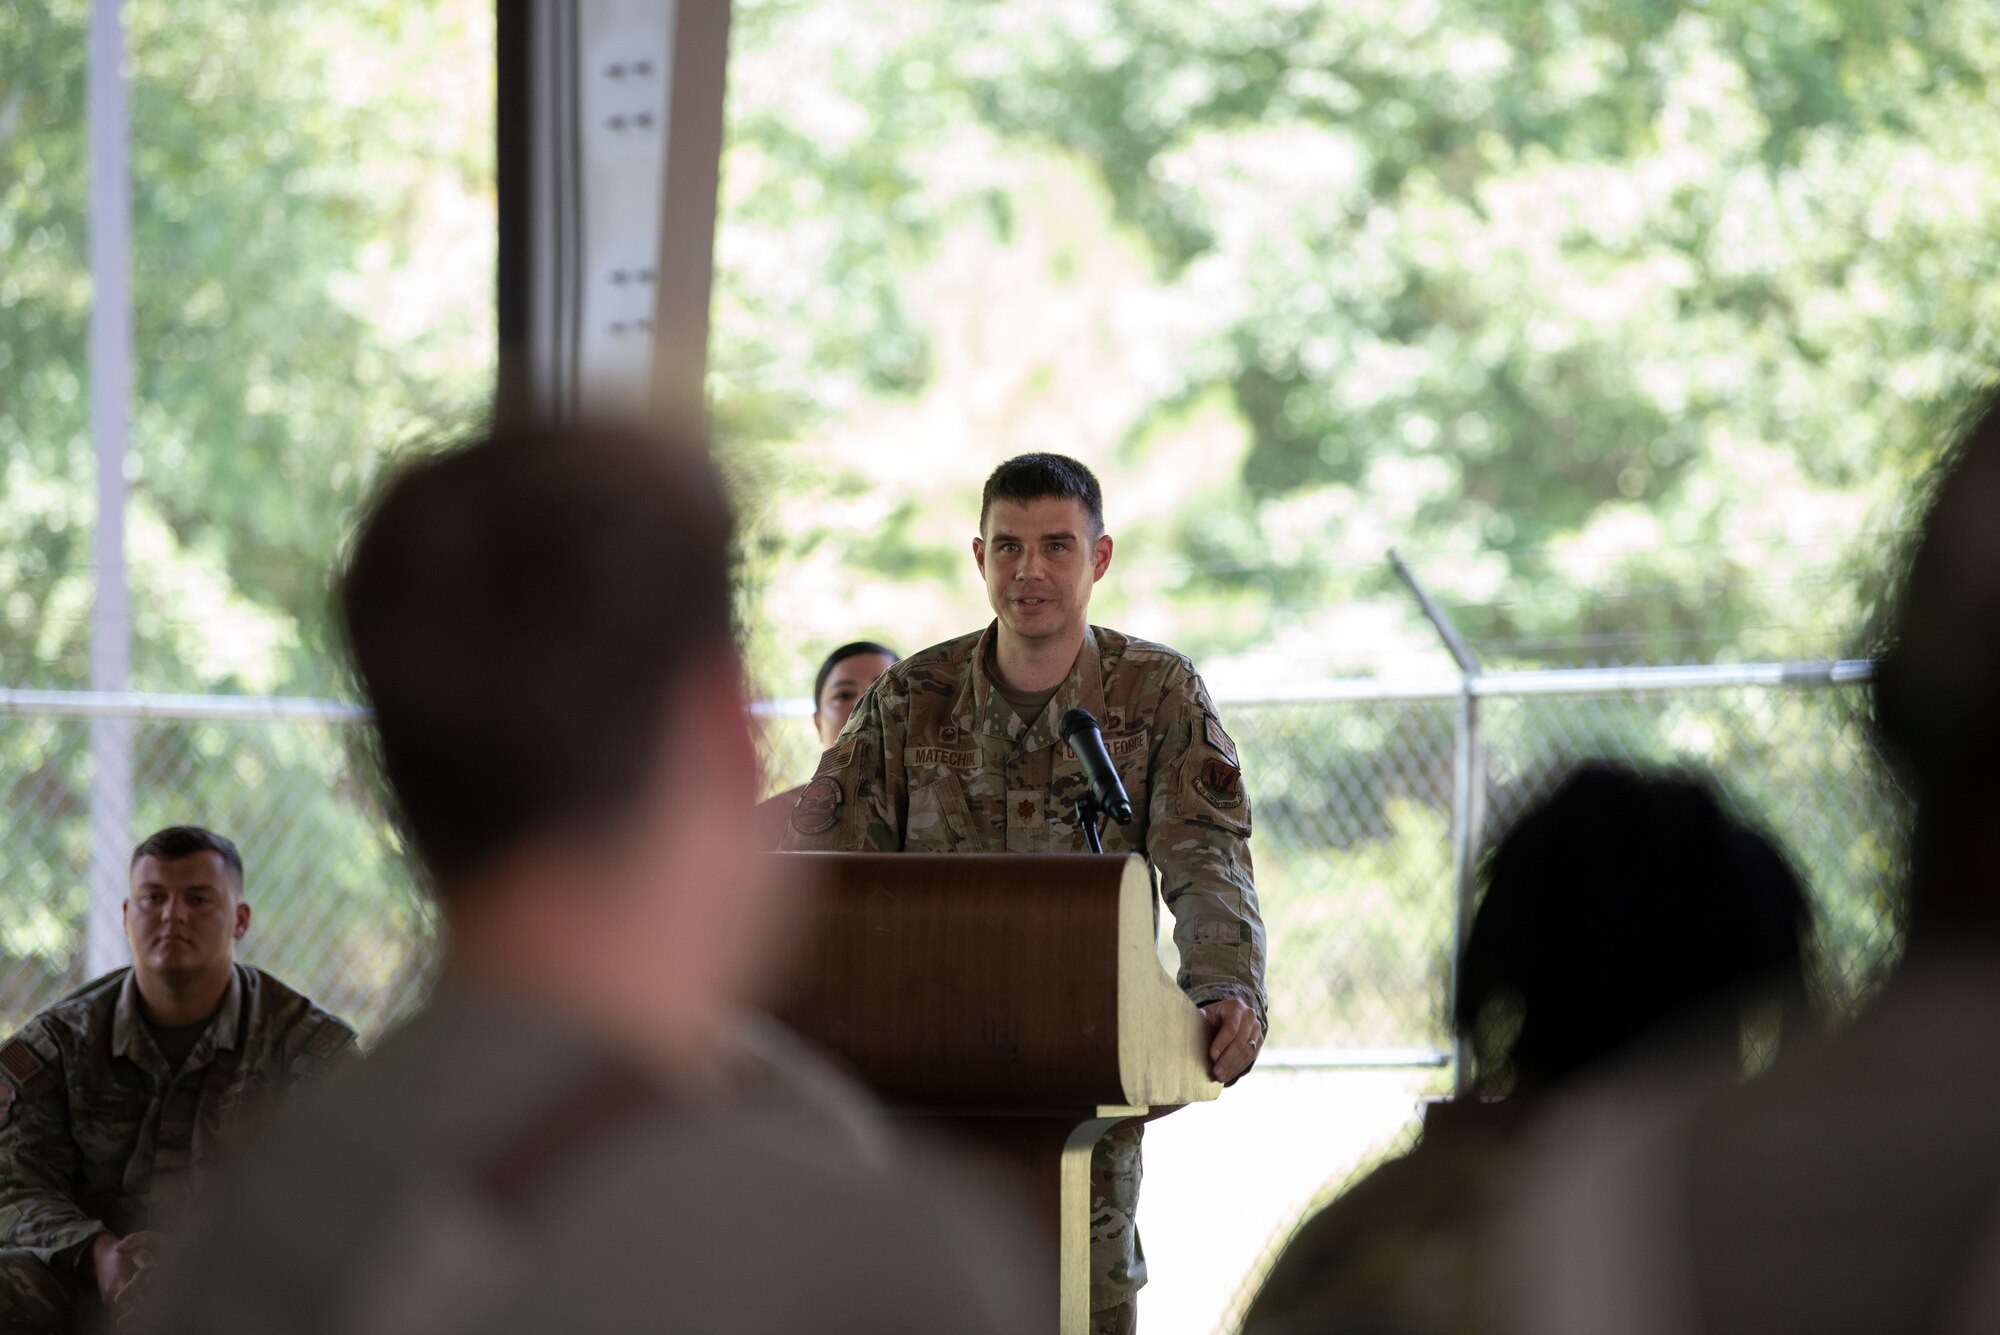 A photo of an Airman standing at a podium.